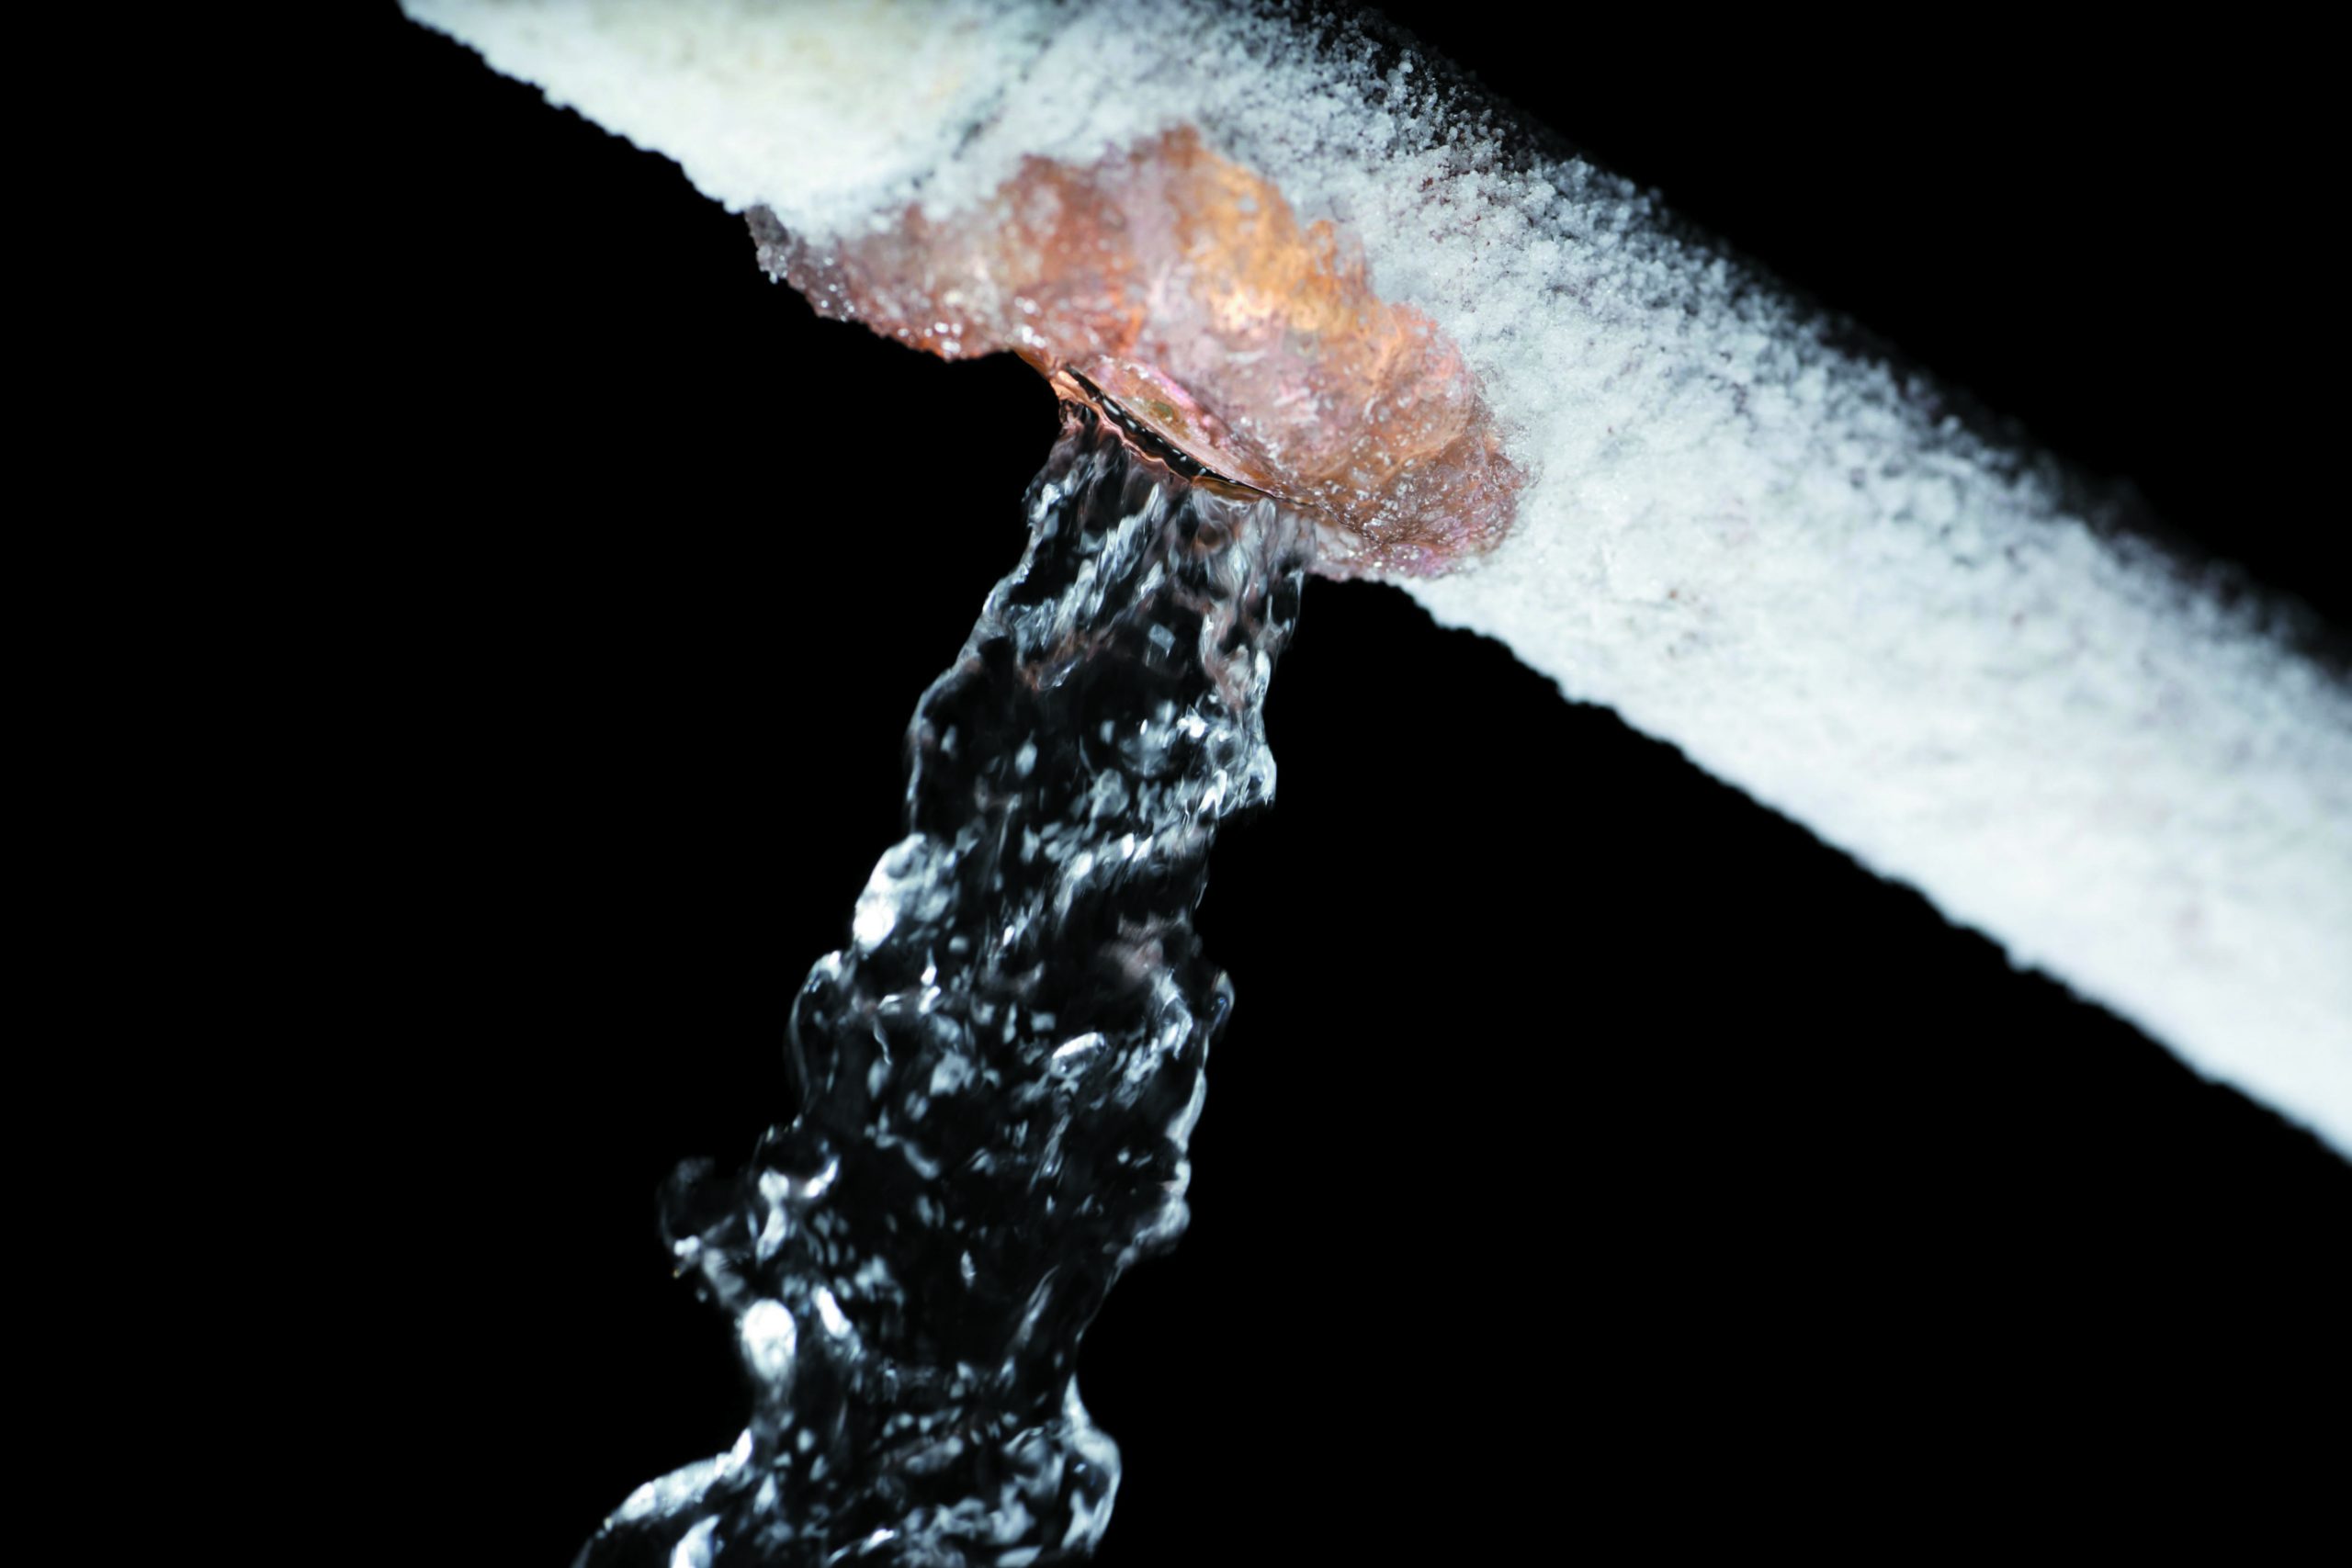 TIPS FOR PREVENTING FROZEN PIPES